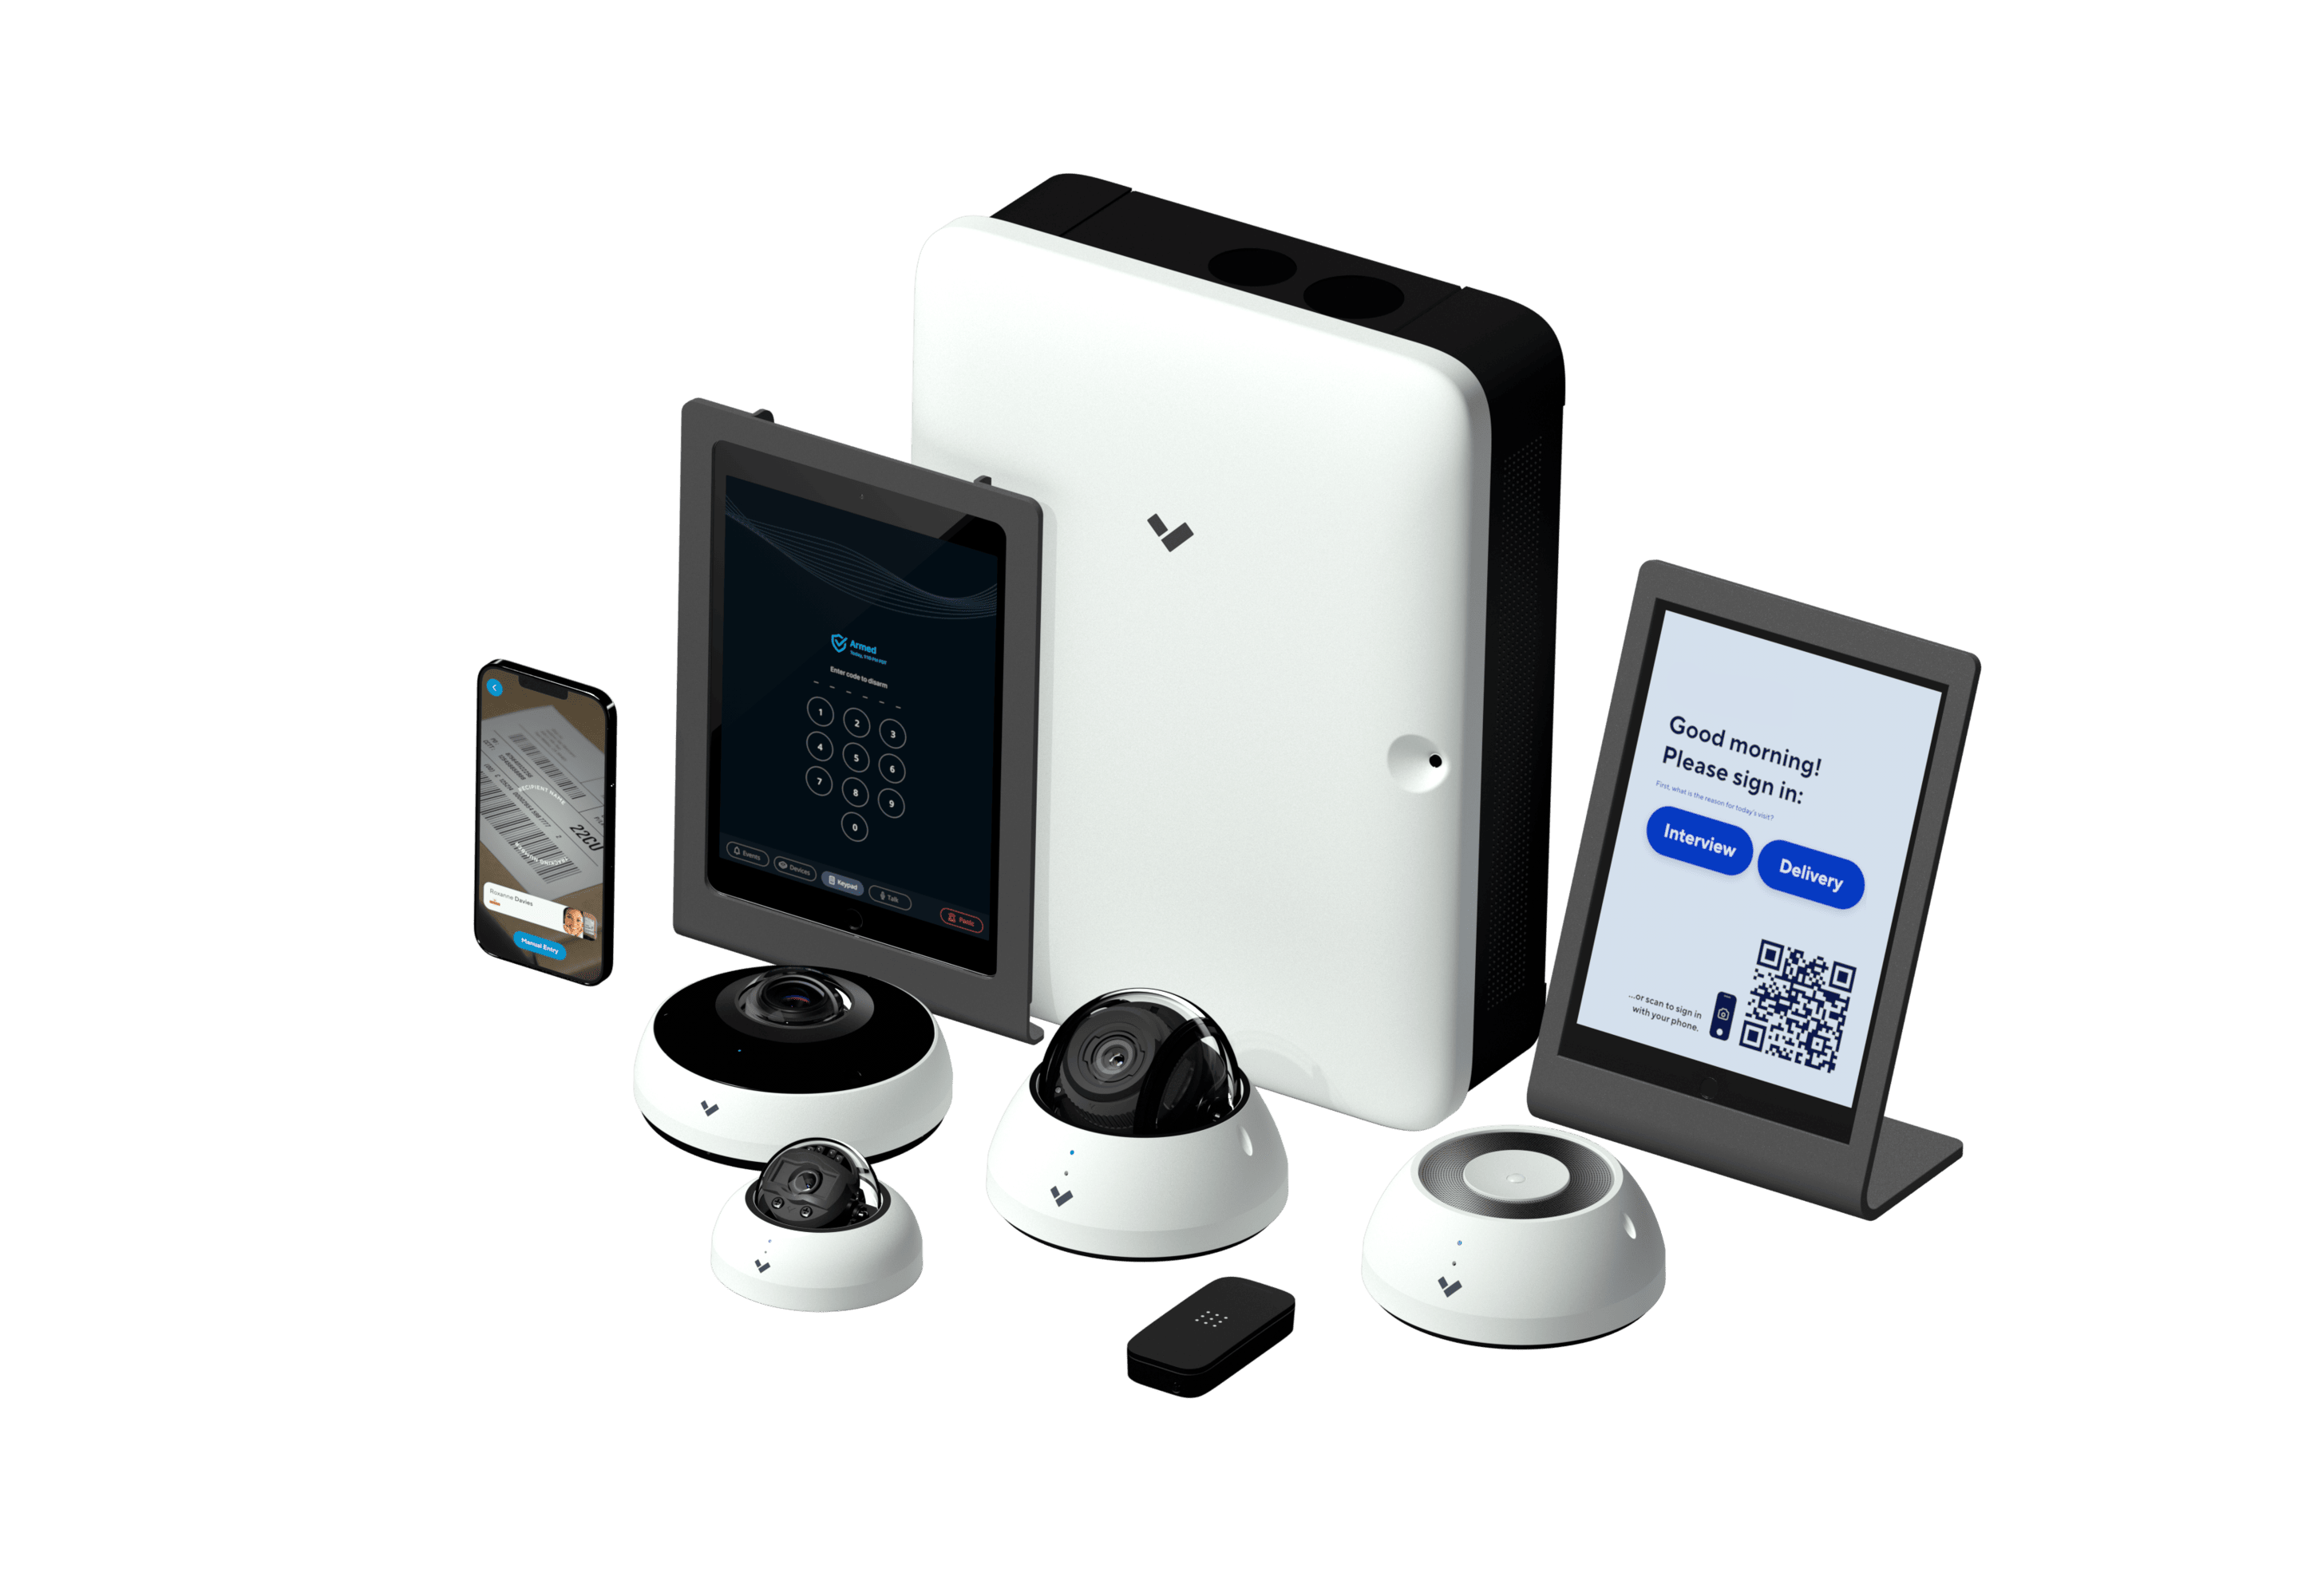 Verkada security camera family for businesses in Raleigh, NC